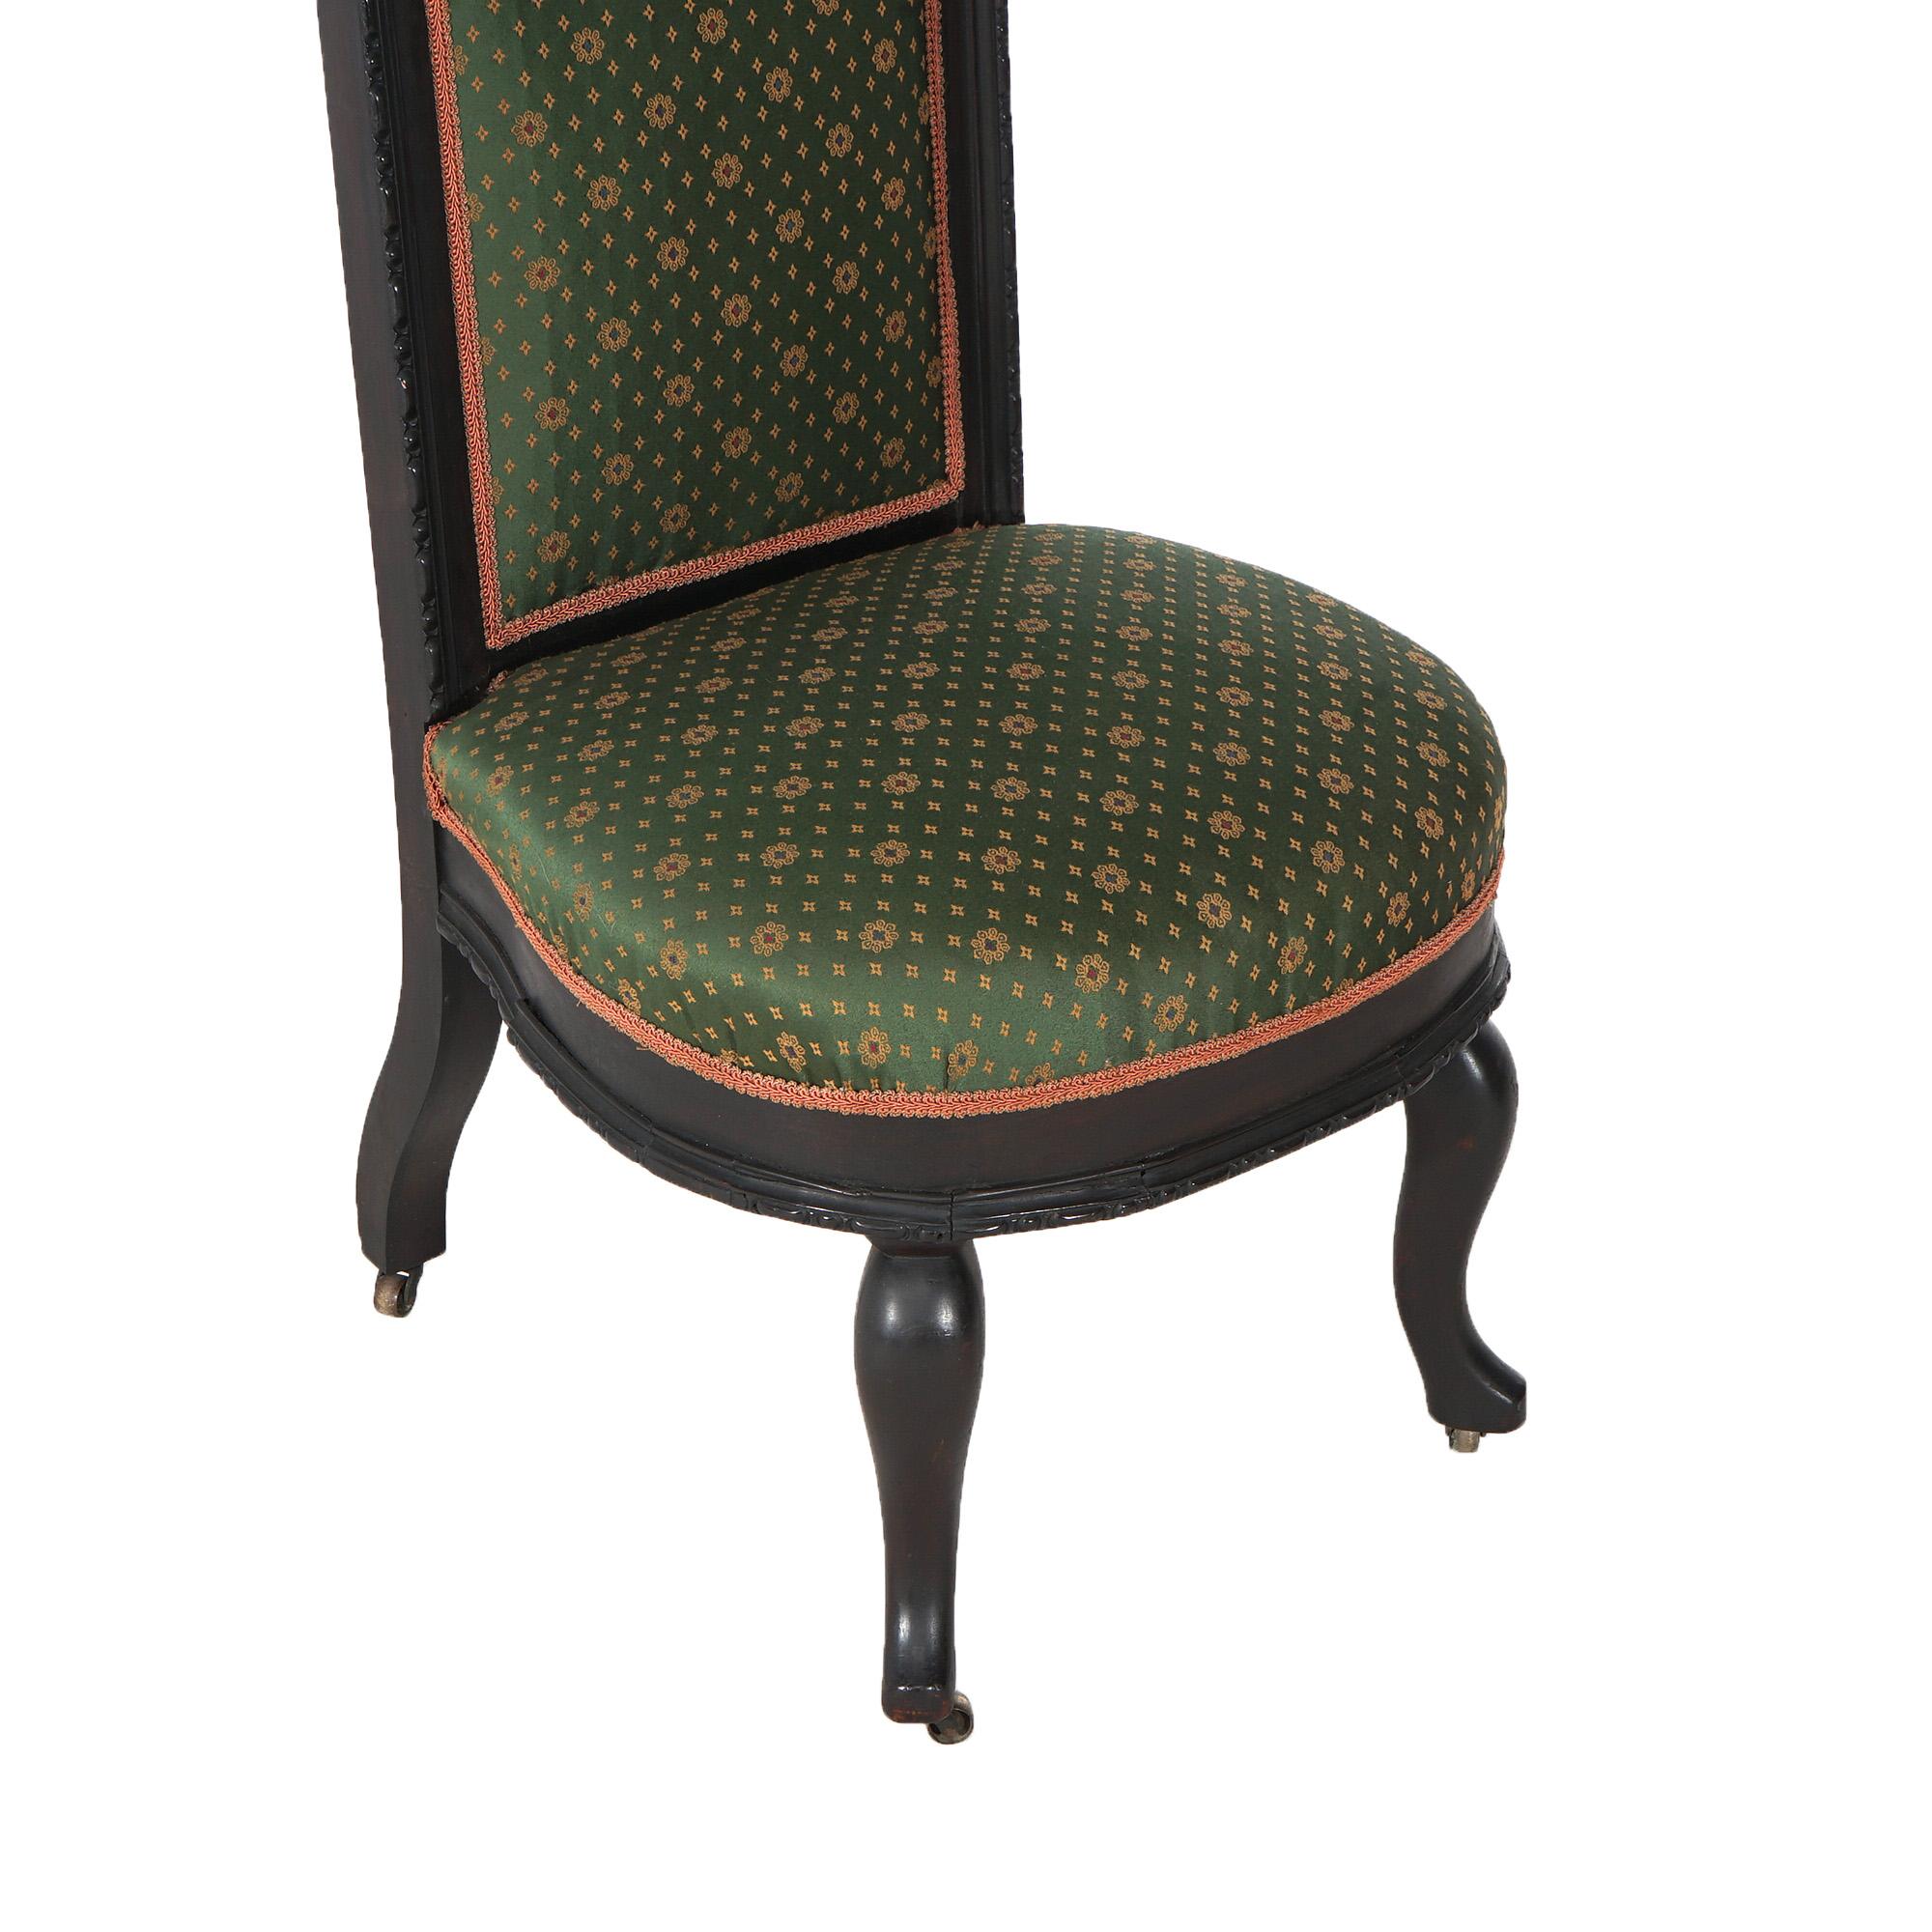 Antique Gothic Revival Ebonized & Carved Walnut Upholstered Throne Chair C1860 For Sale 6